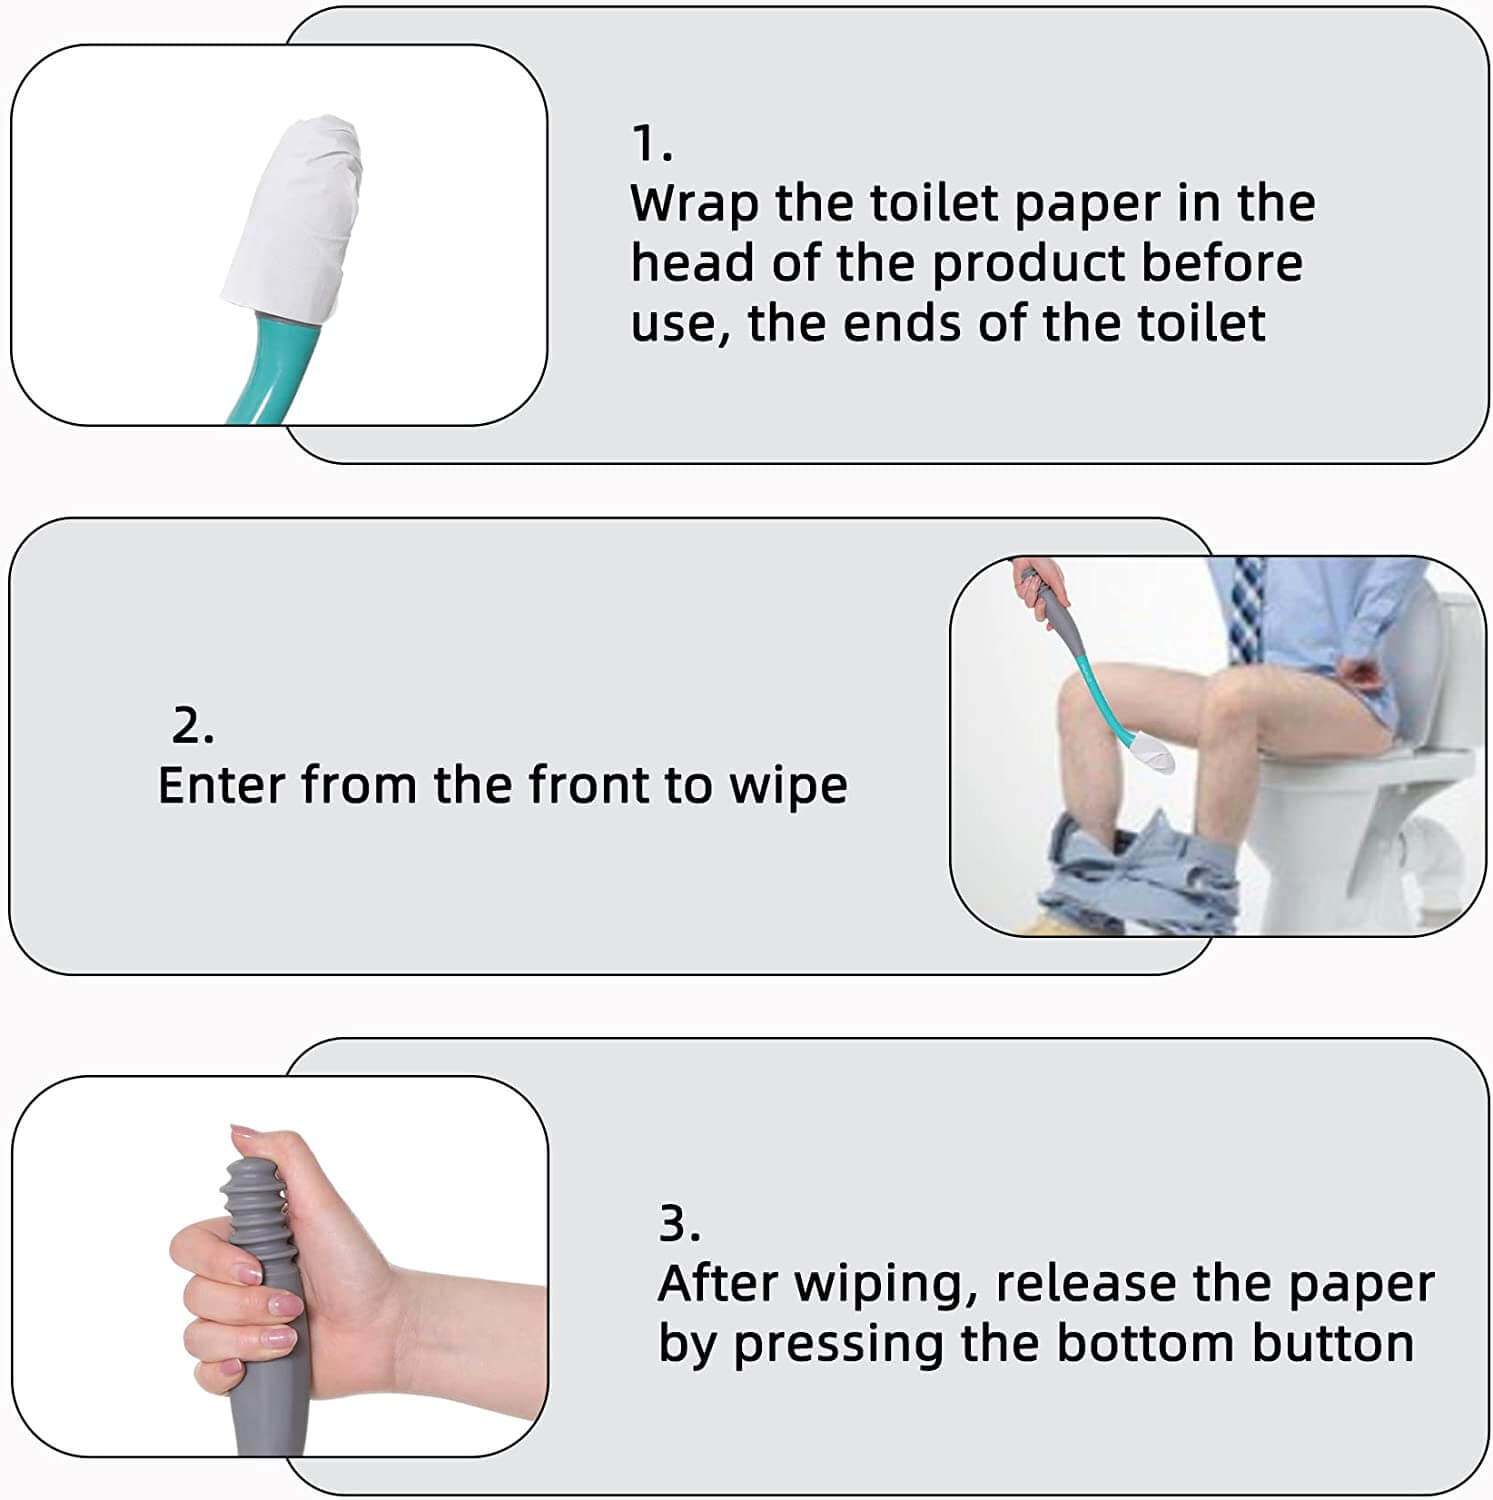 Fanwer Toilet Aids for Disabled, Elderly, Obese, Seniors or Arthritis, feature image, steps of using